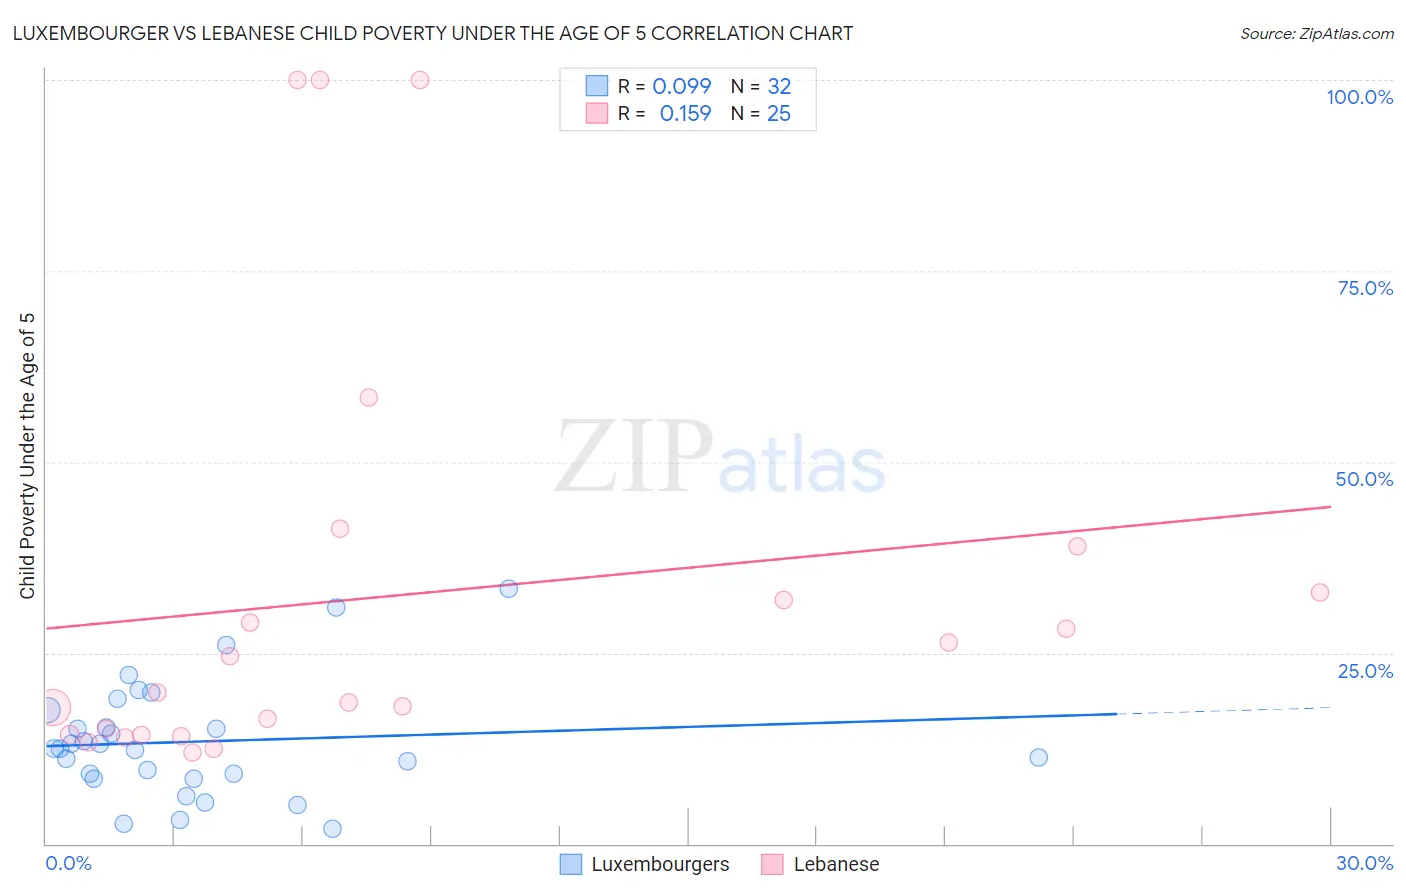 Luxembourger vs Lebanese Child Poverty Under the Age of 5